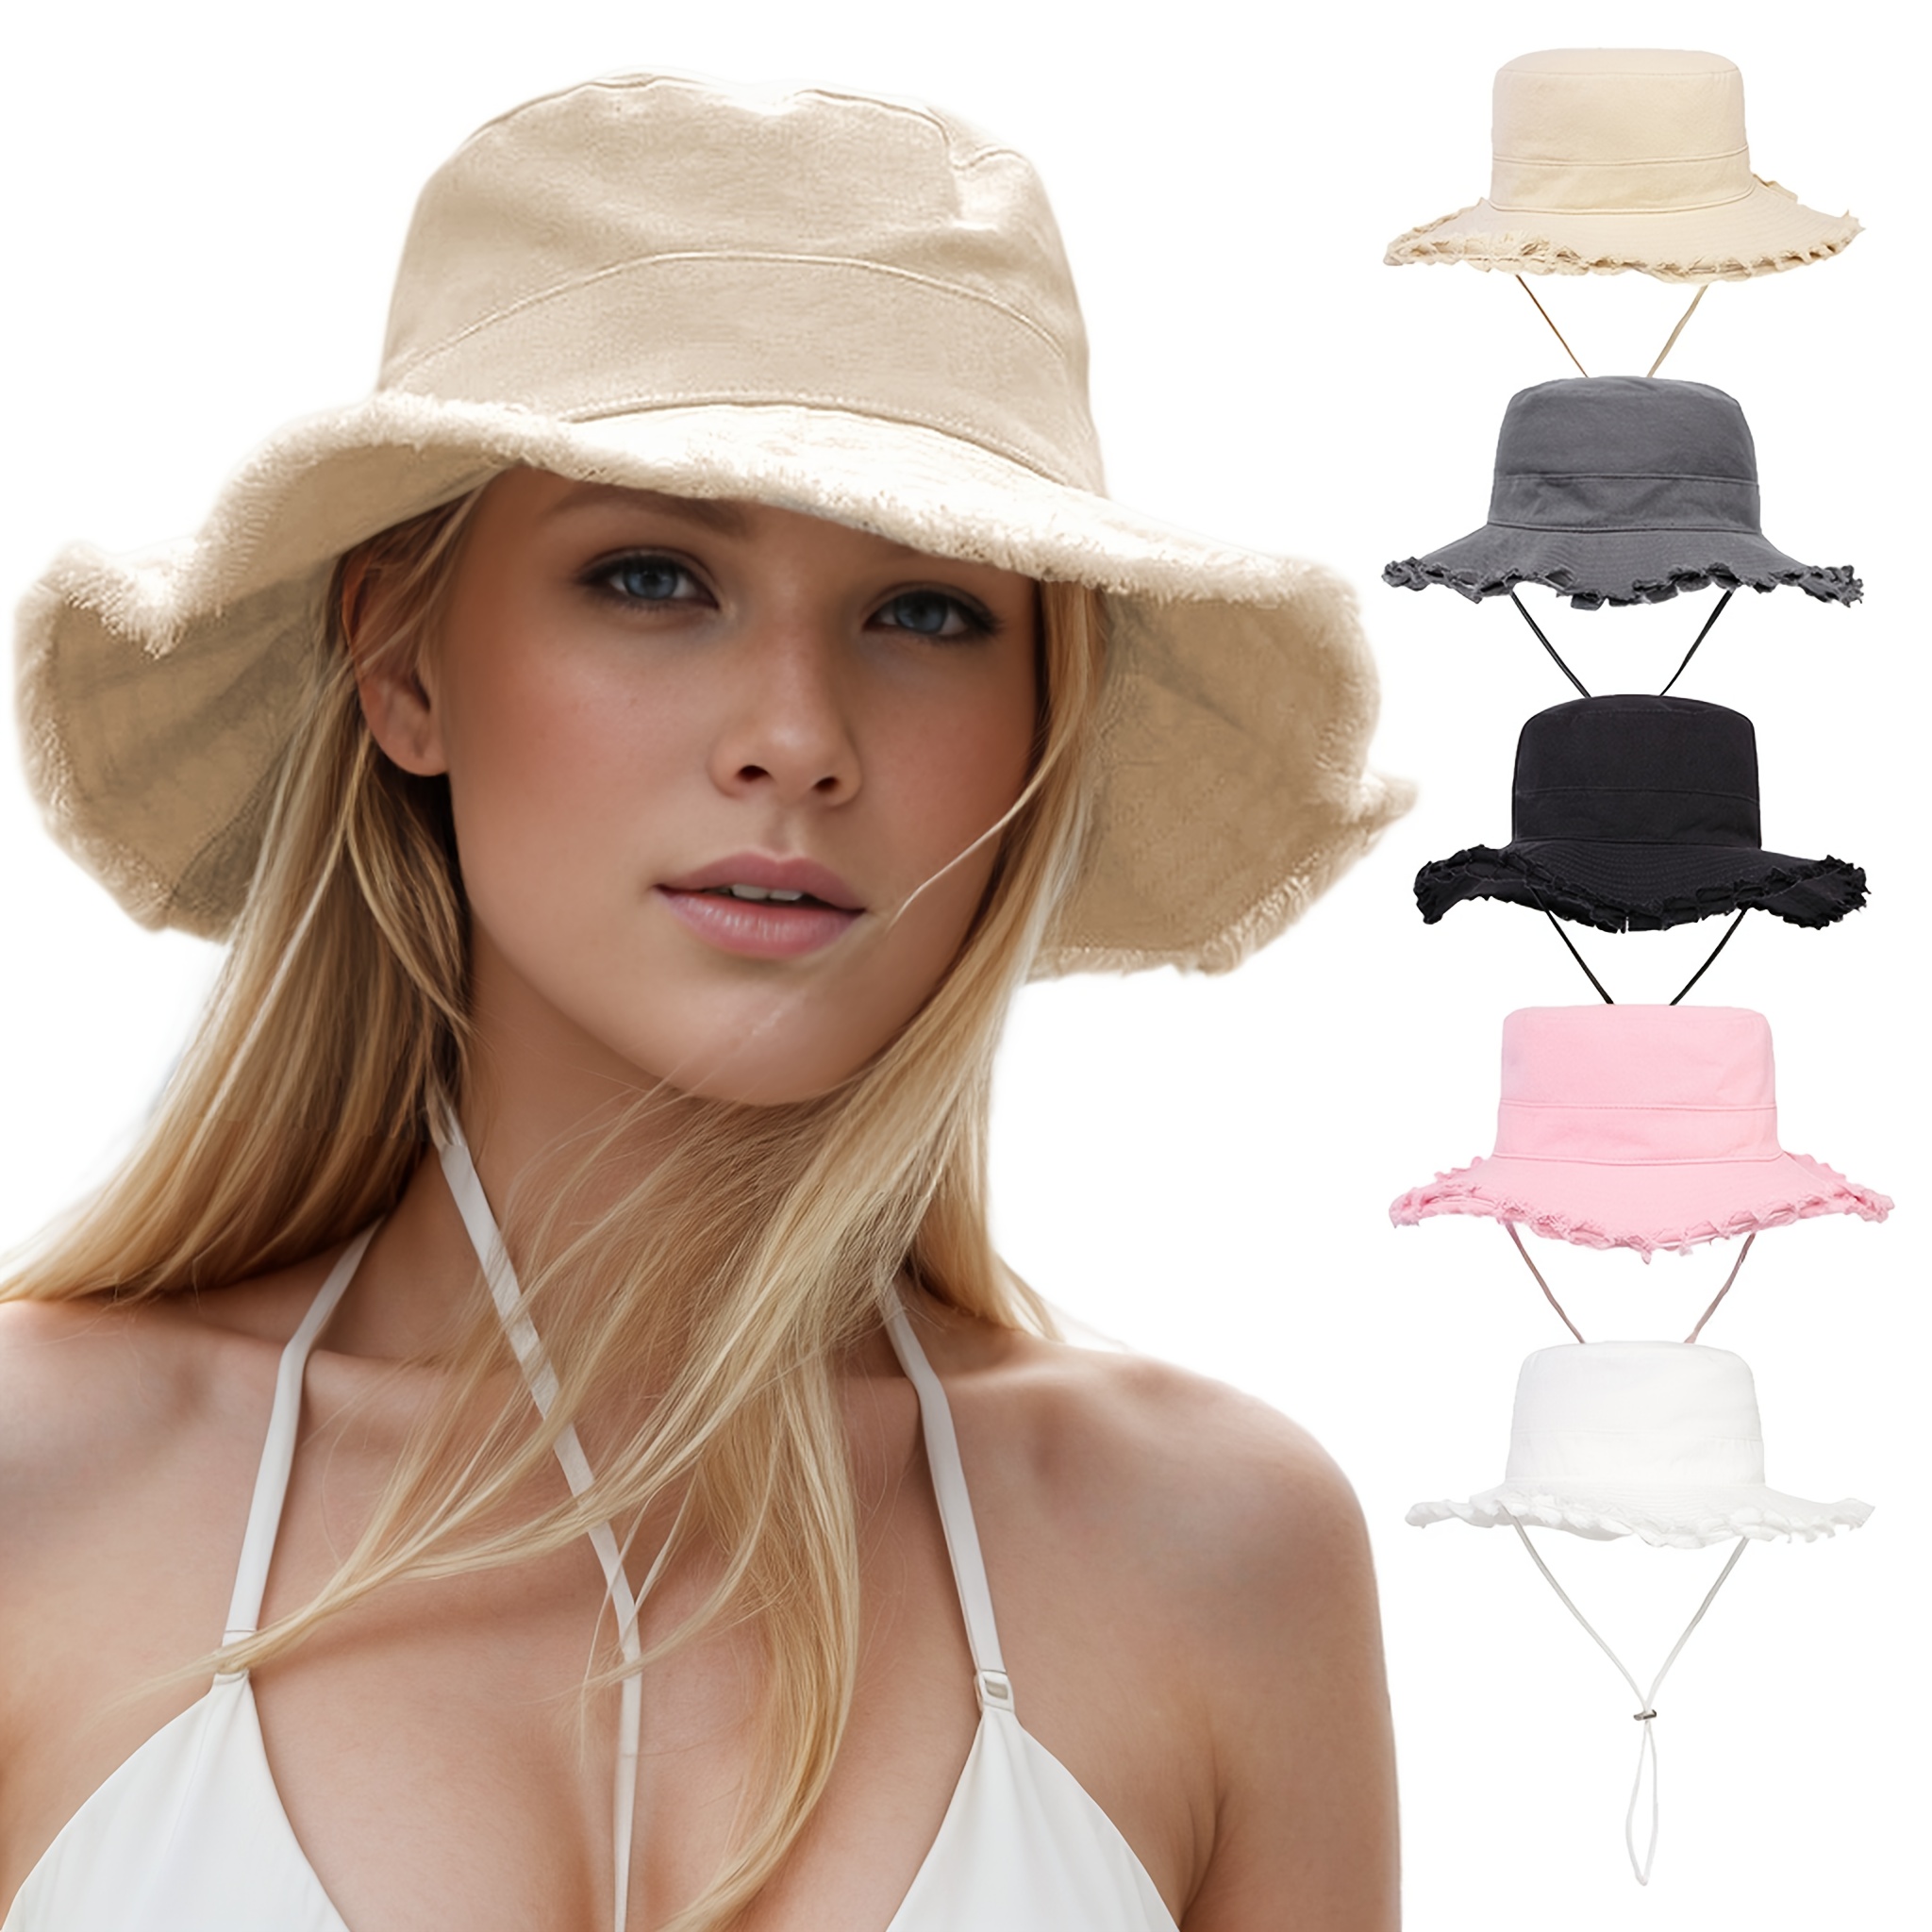 

Women's Fishing Cap With Sun Protection, Cotton Material Bucket Hat, Foldable And Adjustable Boonie Hat, Perfect For Summer Outdoor Activities